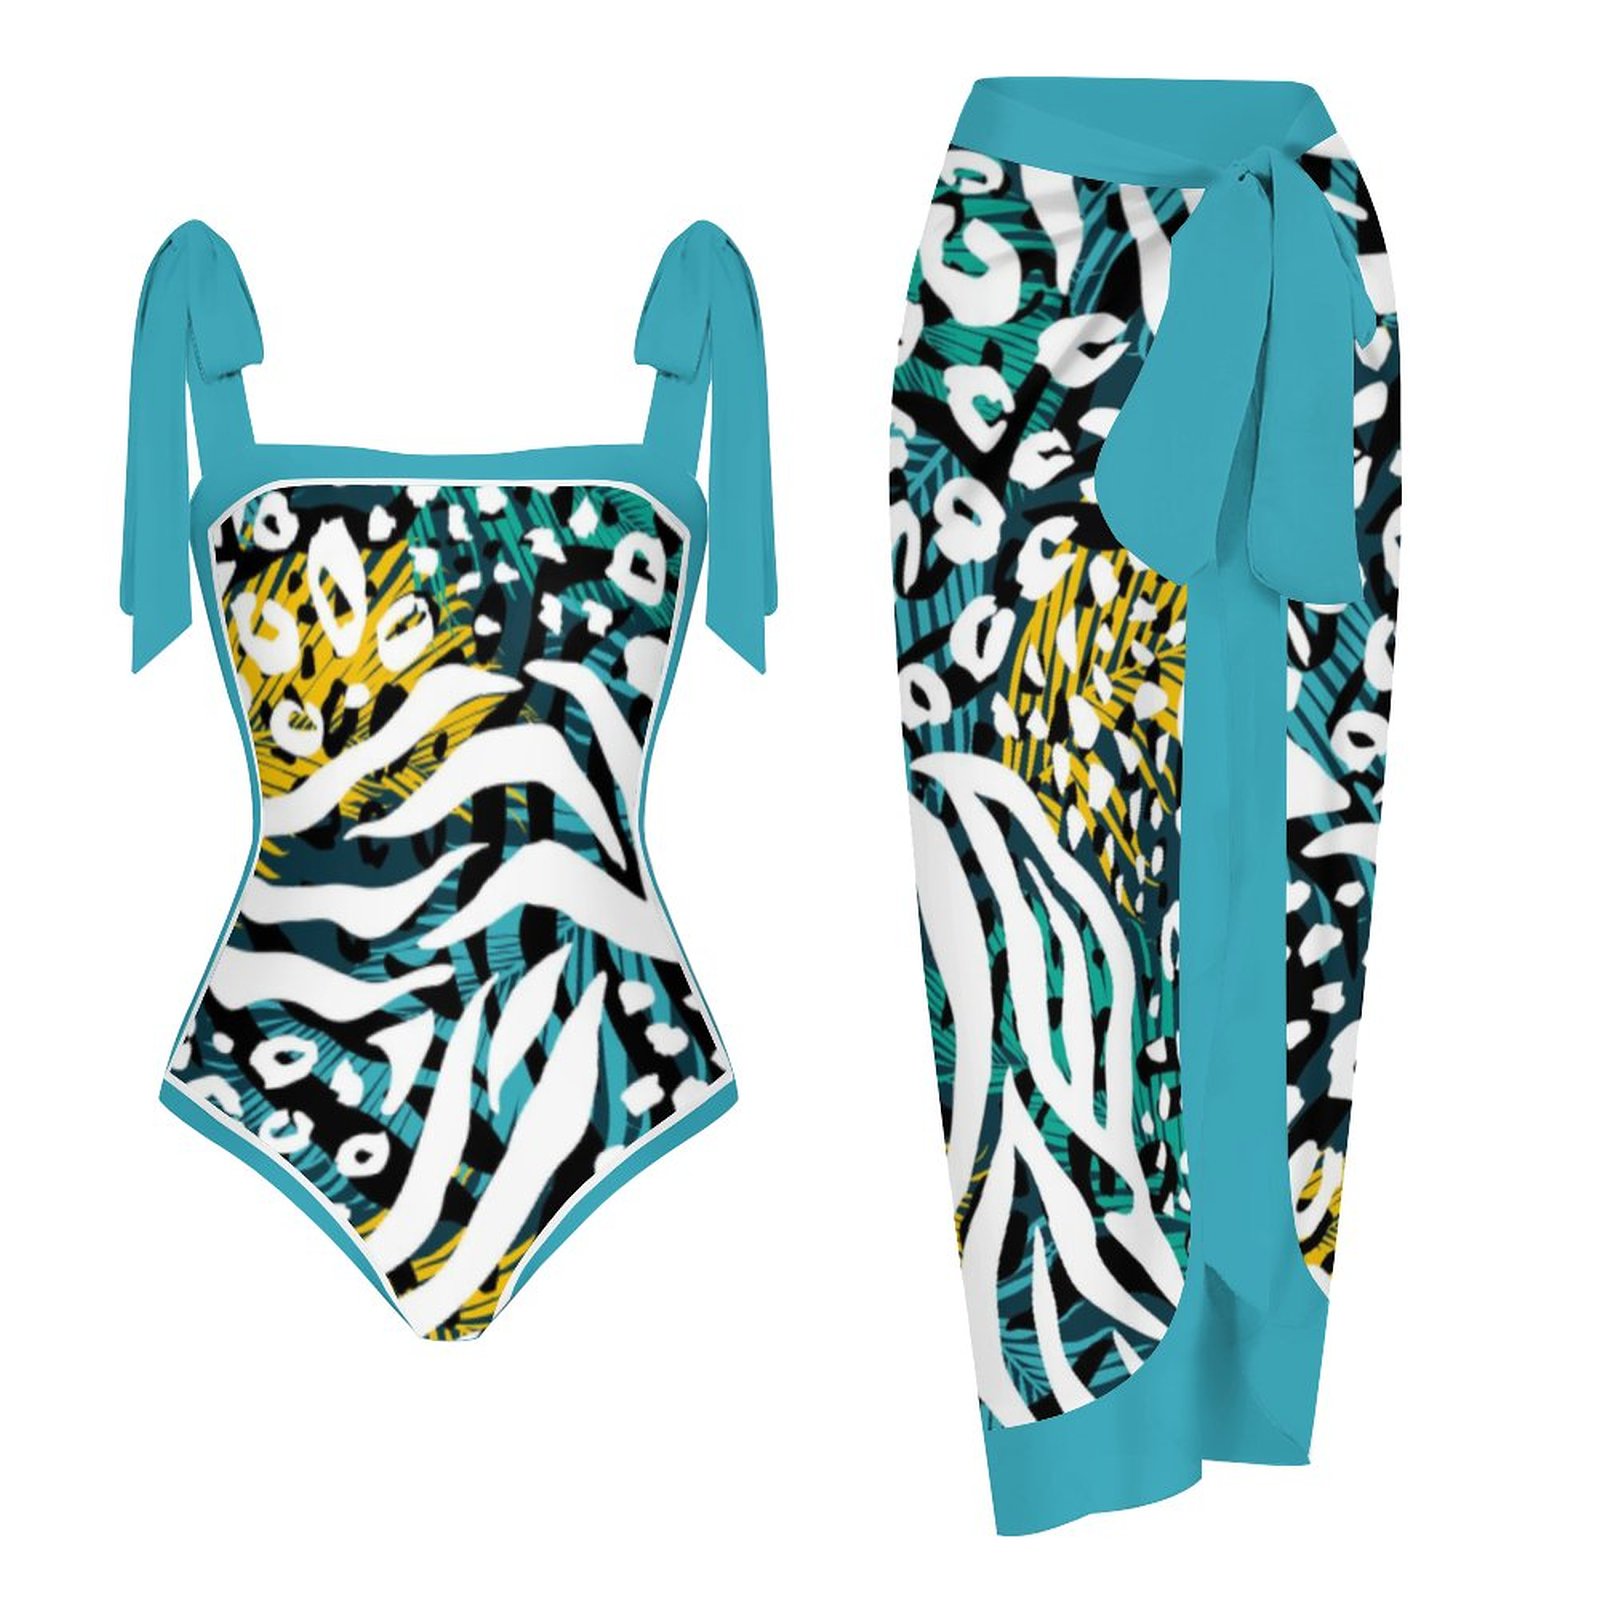 Fashion Printed One Piece Swimsuit And Cover Up